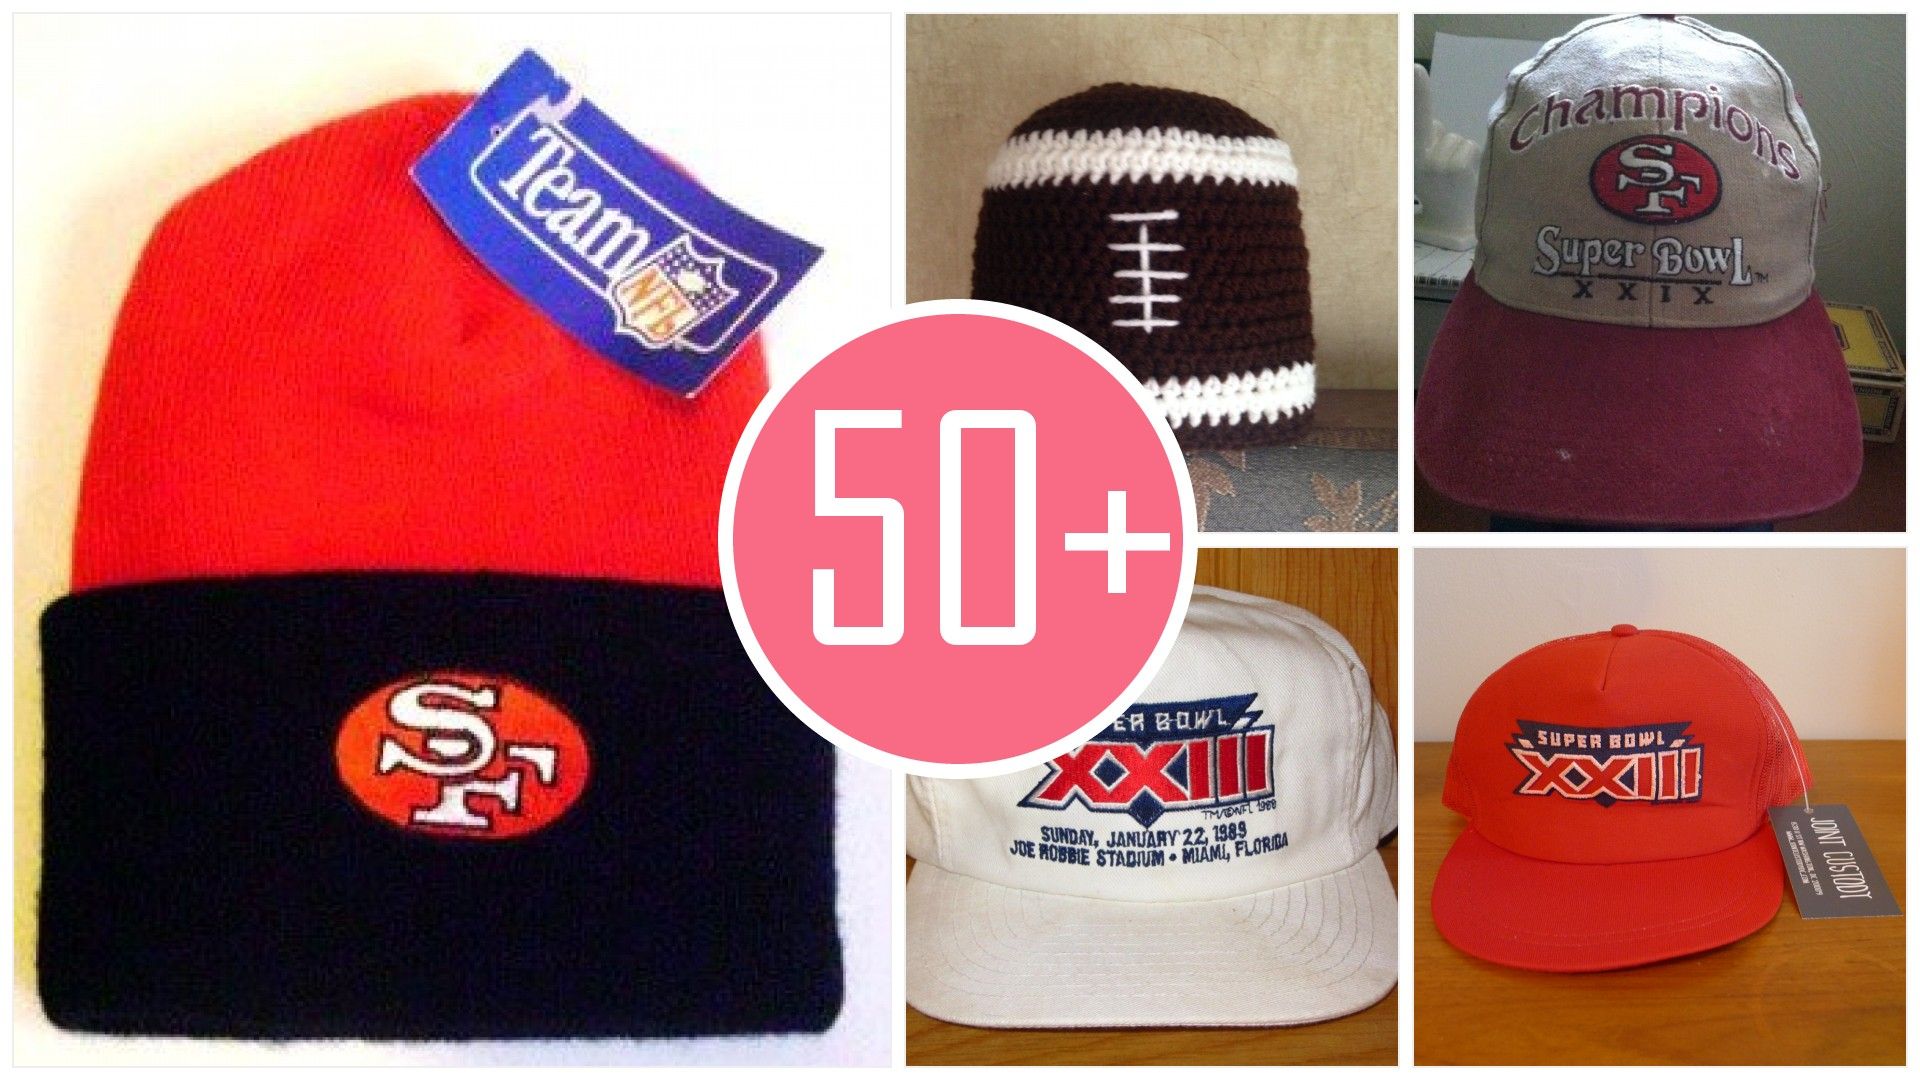 Super Bowl San Francisco 49ers Hats From Huiyidiandian Loveitsomuch